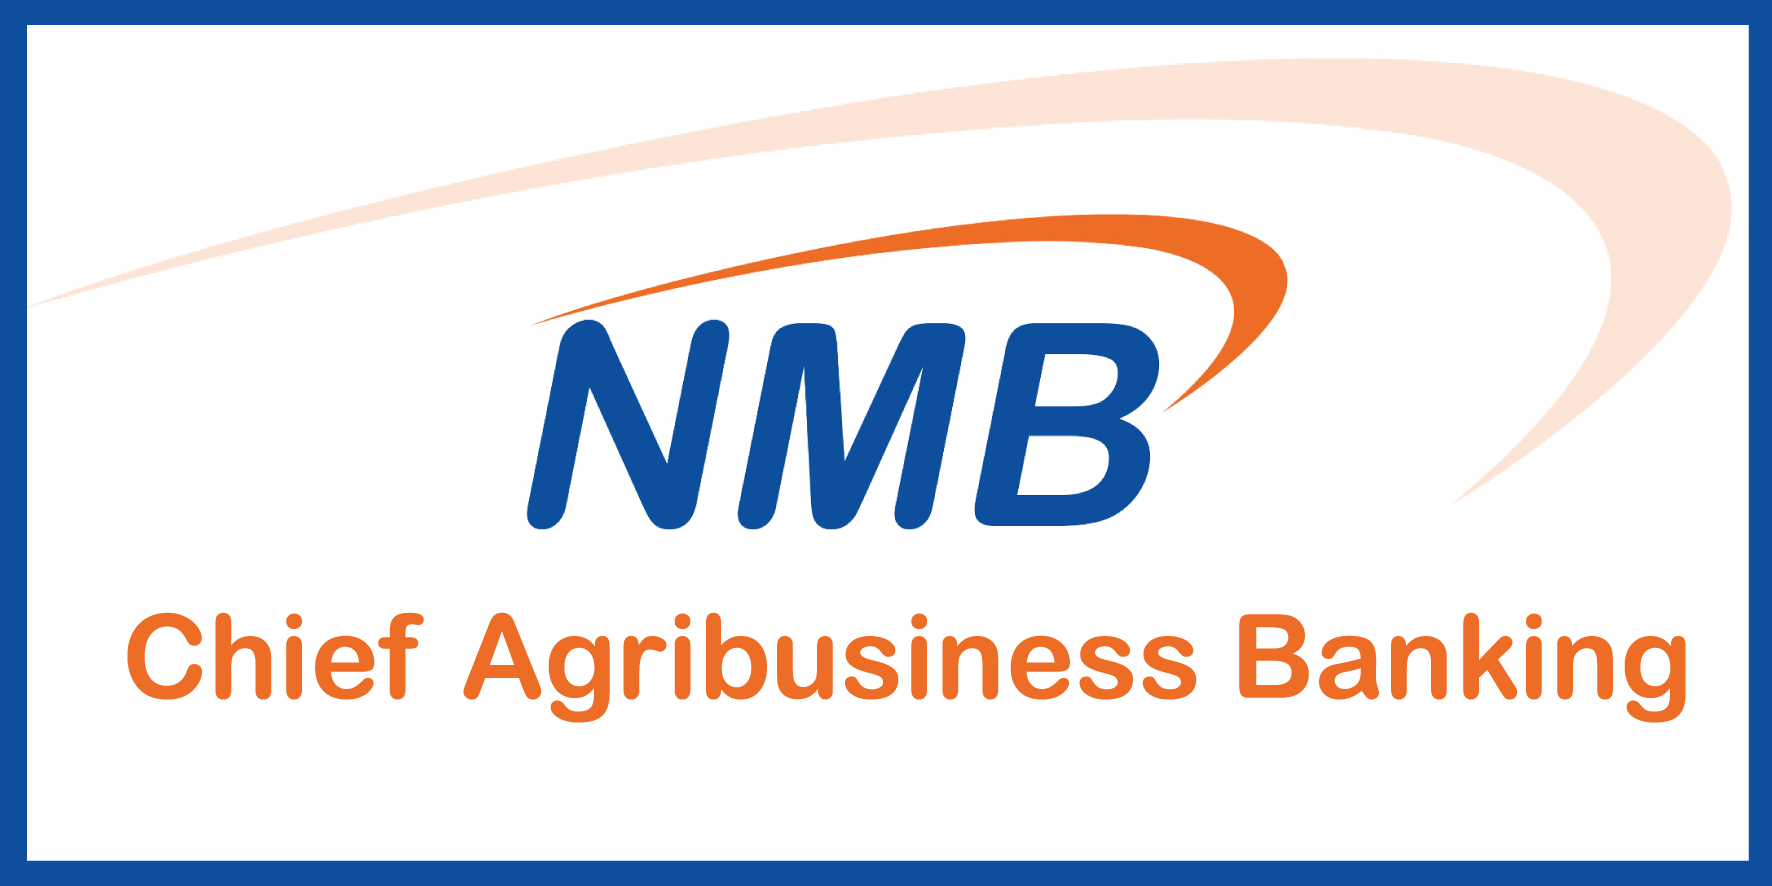 NMB Logo - NMB - Chief Agribusiness Banking